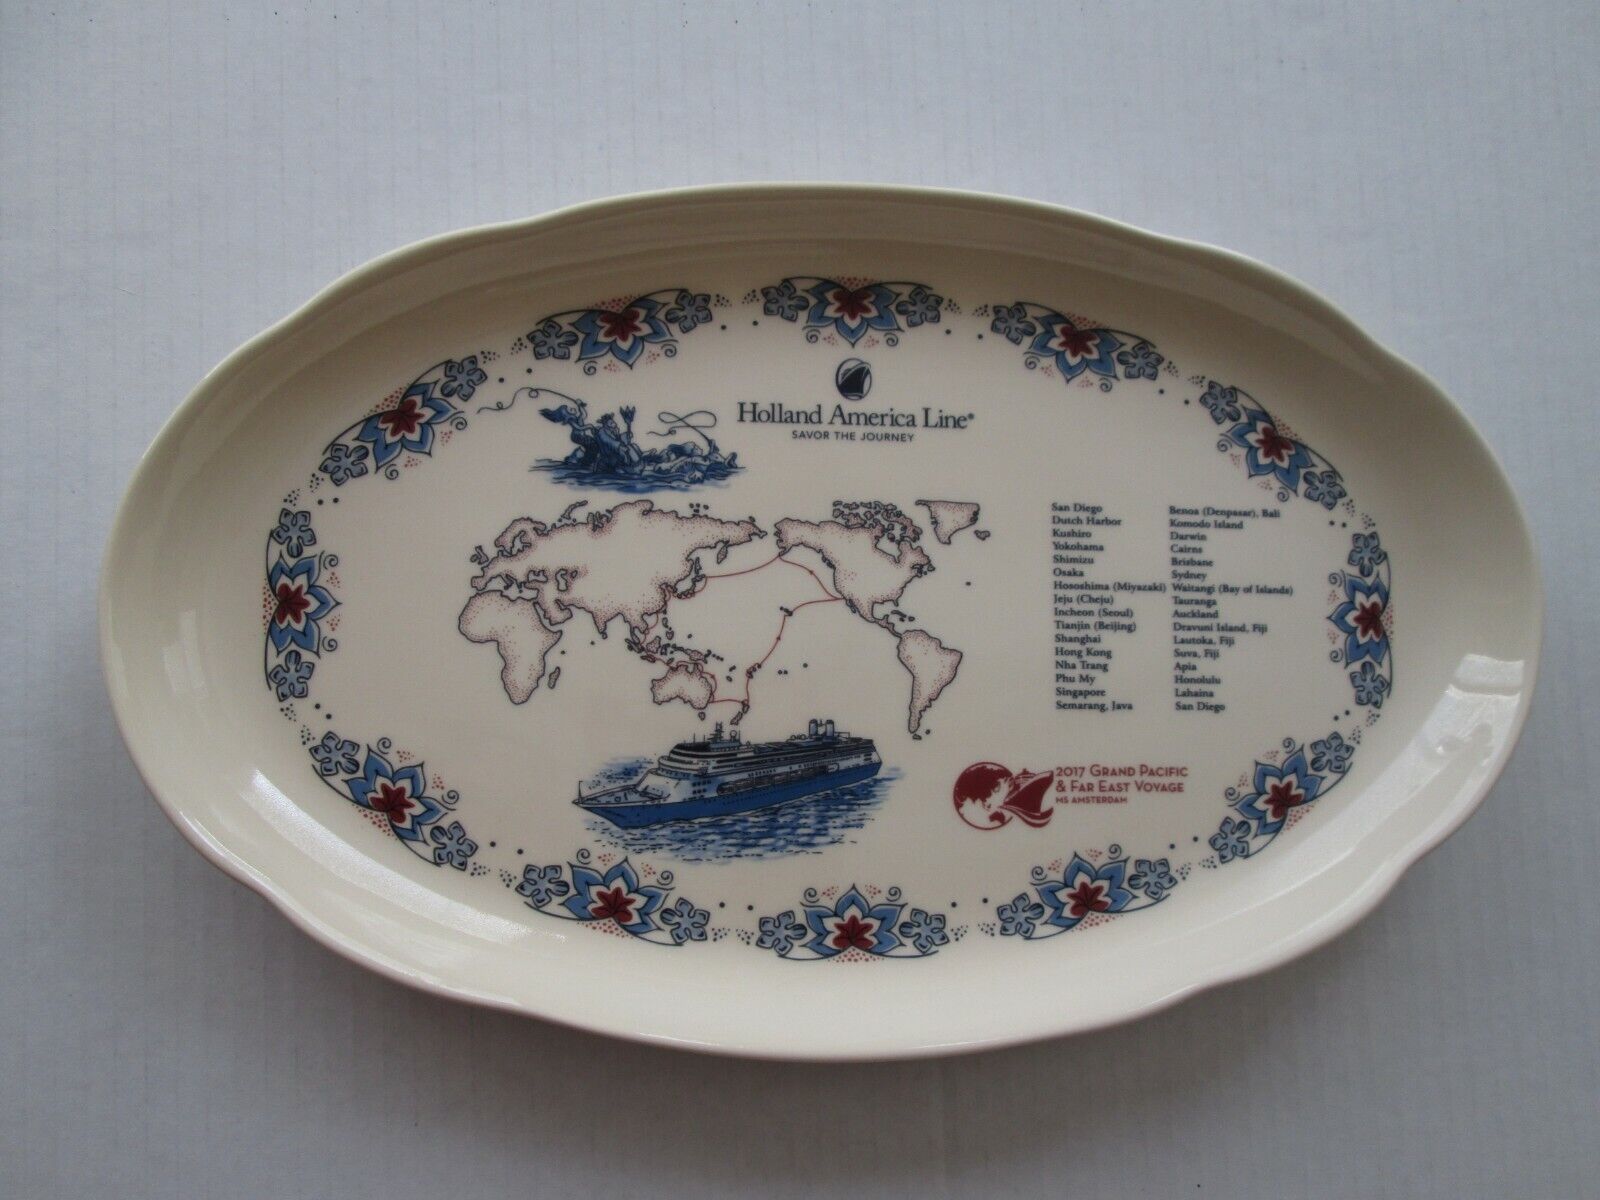 Holland America MS Amsterdam 2017 Grand Pacific & Far East Voyage Oval Platter